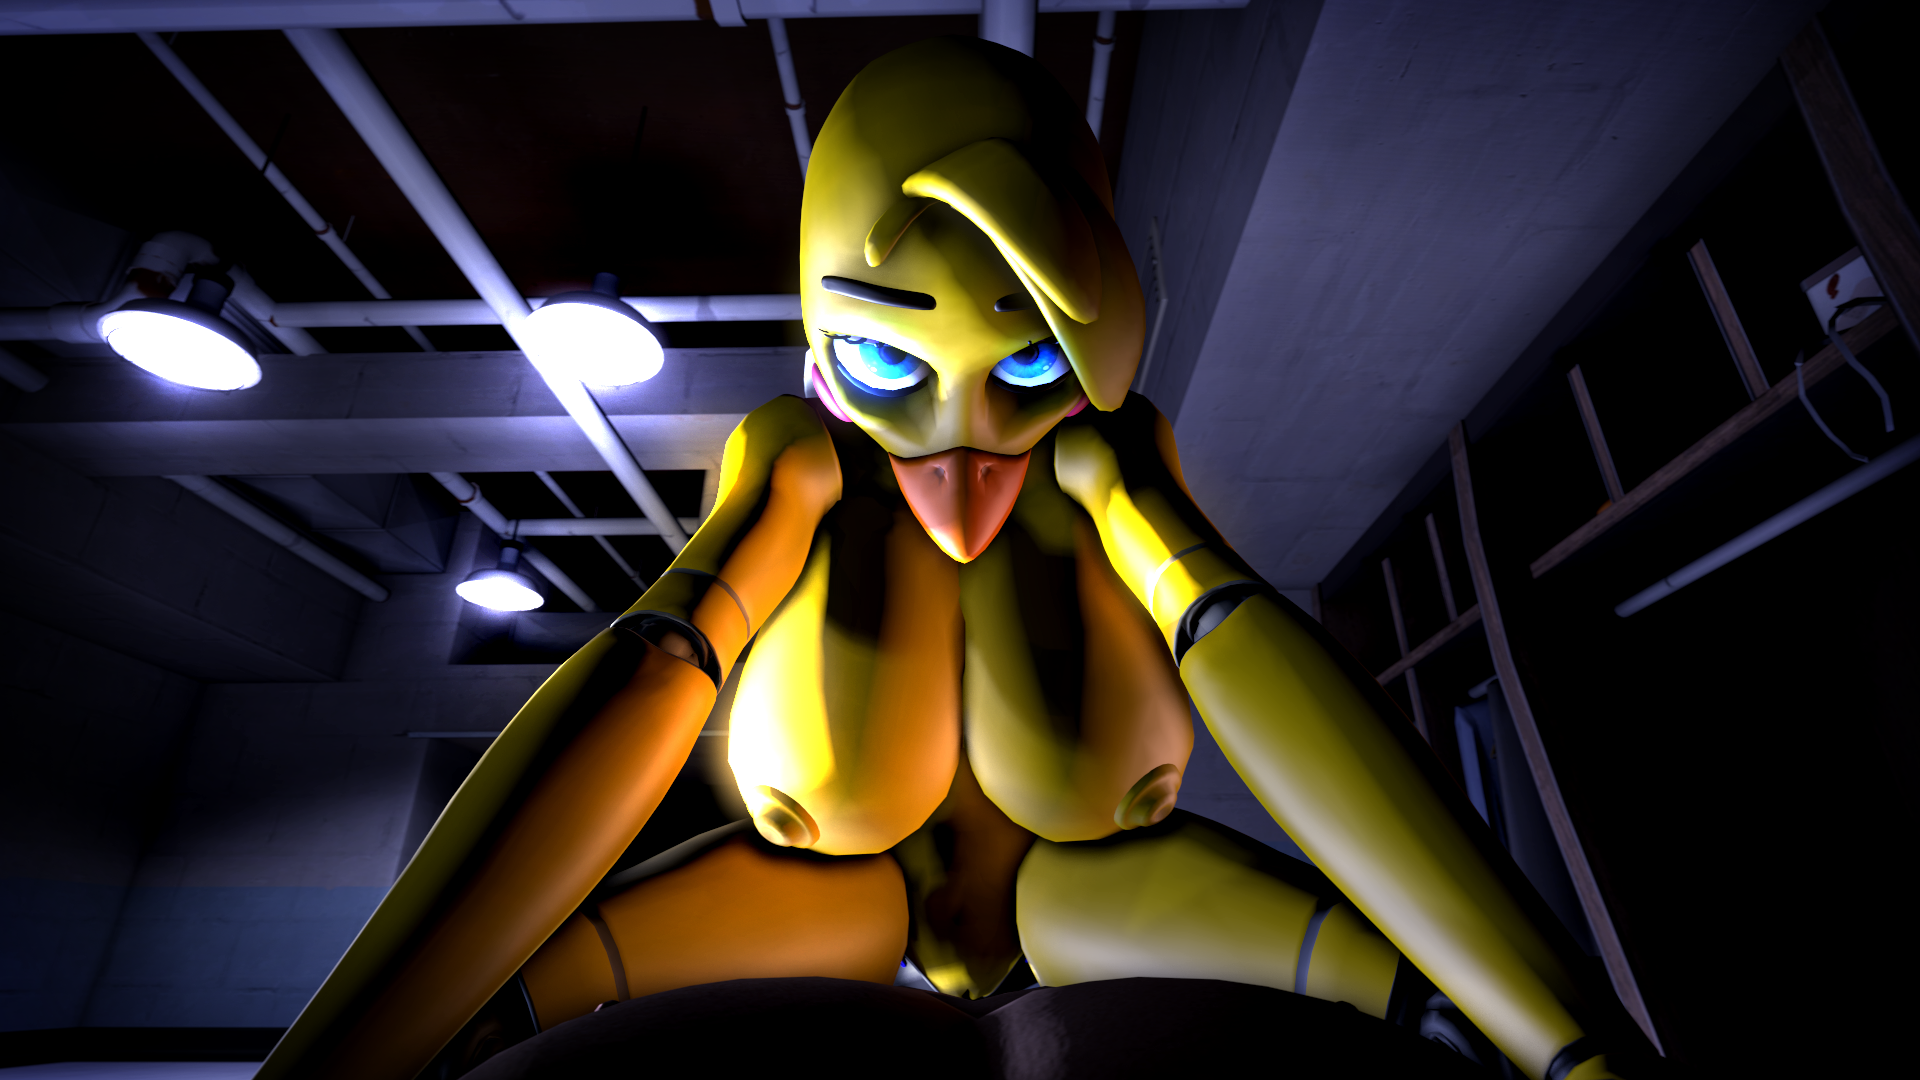 5 Nights At Freddys Chica Sexy - Even More Five Nights at Freddy's Rule 34 â€“ Nerd Porn!